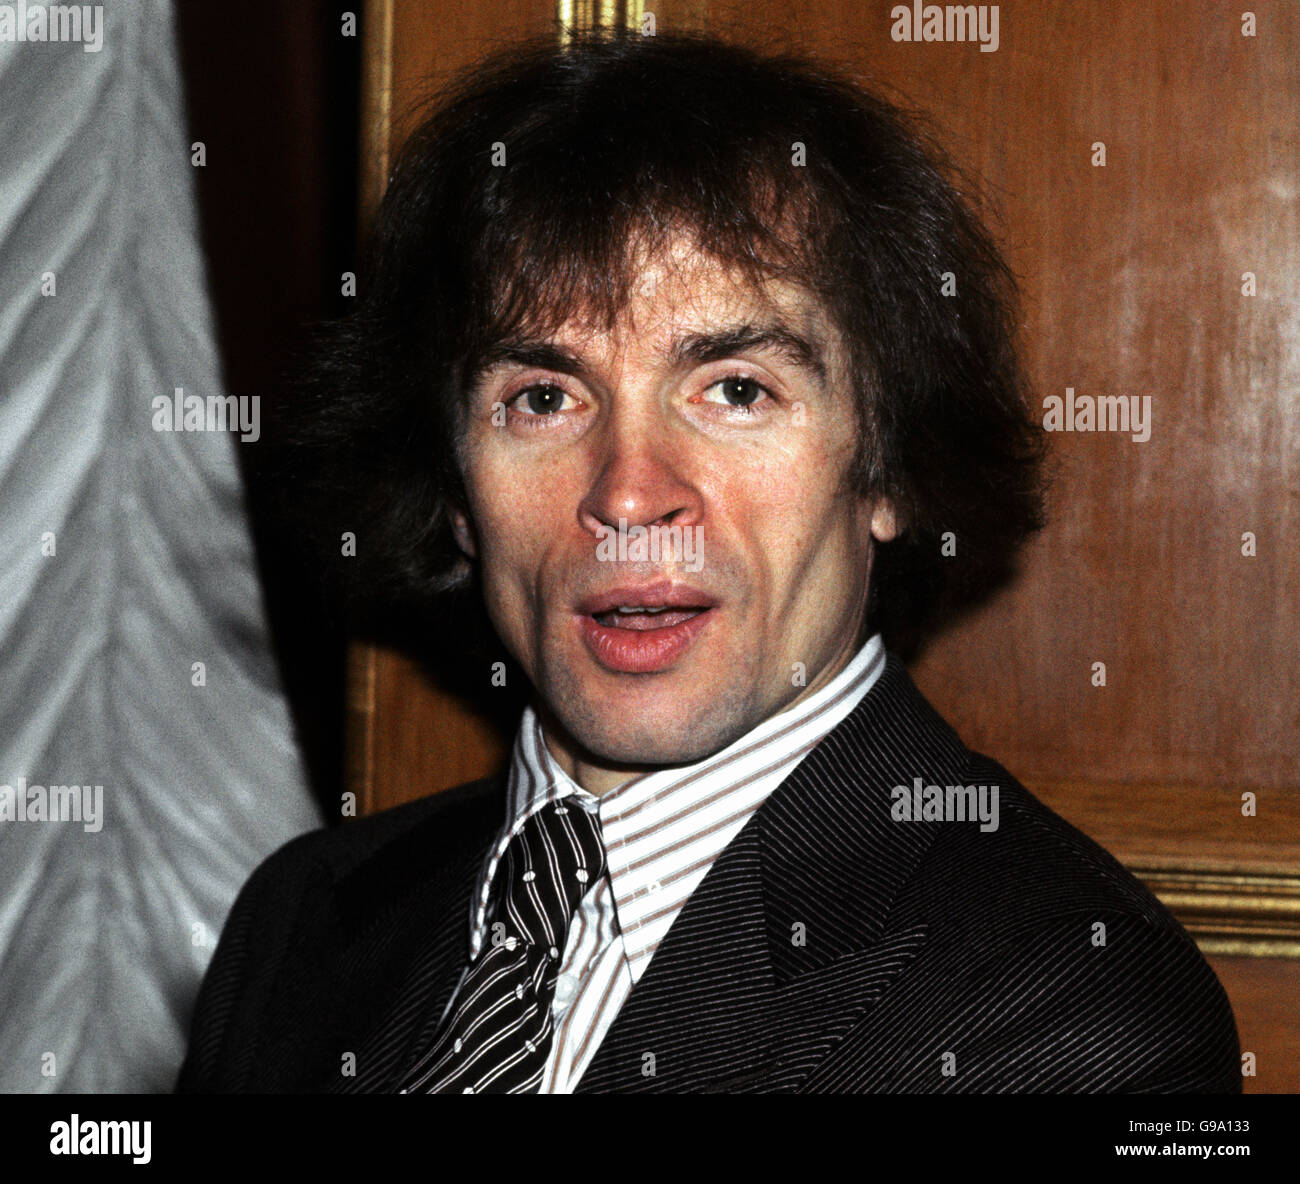 Ballet dancer turned actor Rudolf Nureyev in London before the Royal Premiere of his first film, 'Valentino'. Stock Photo